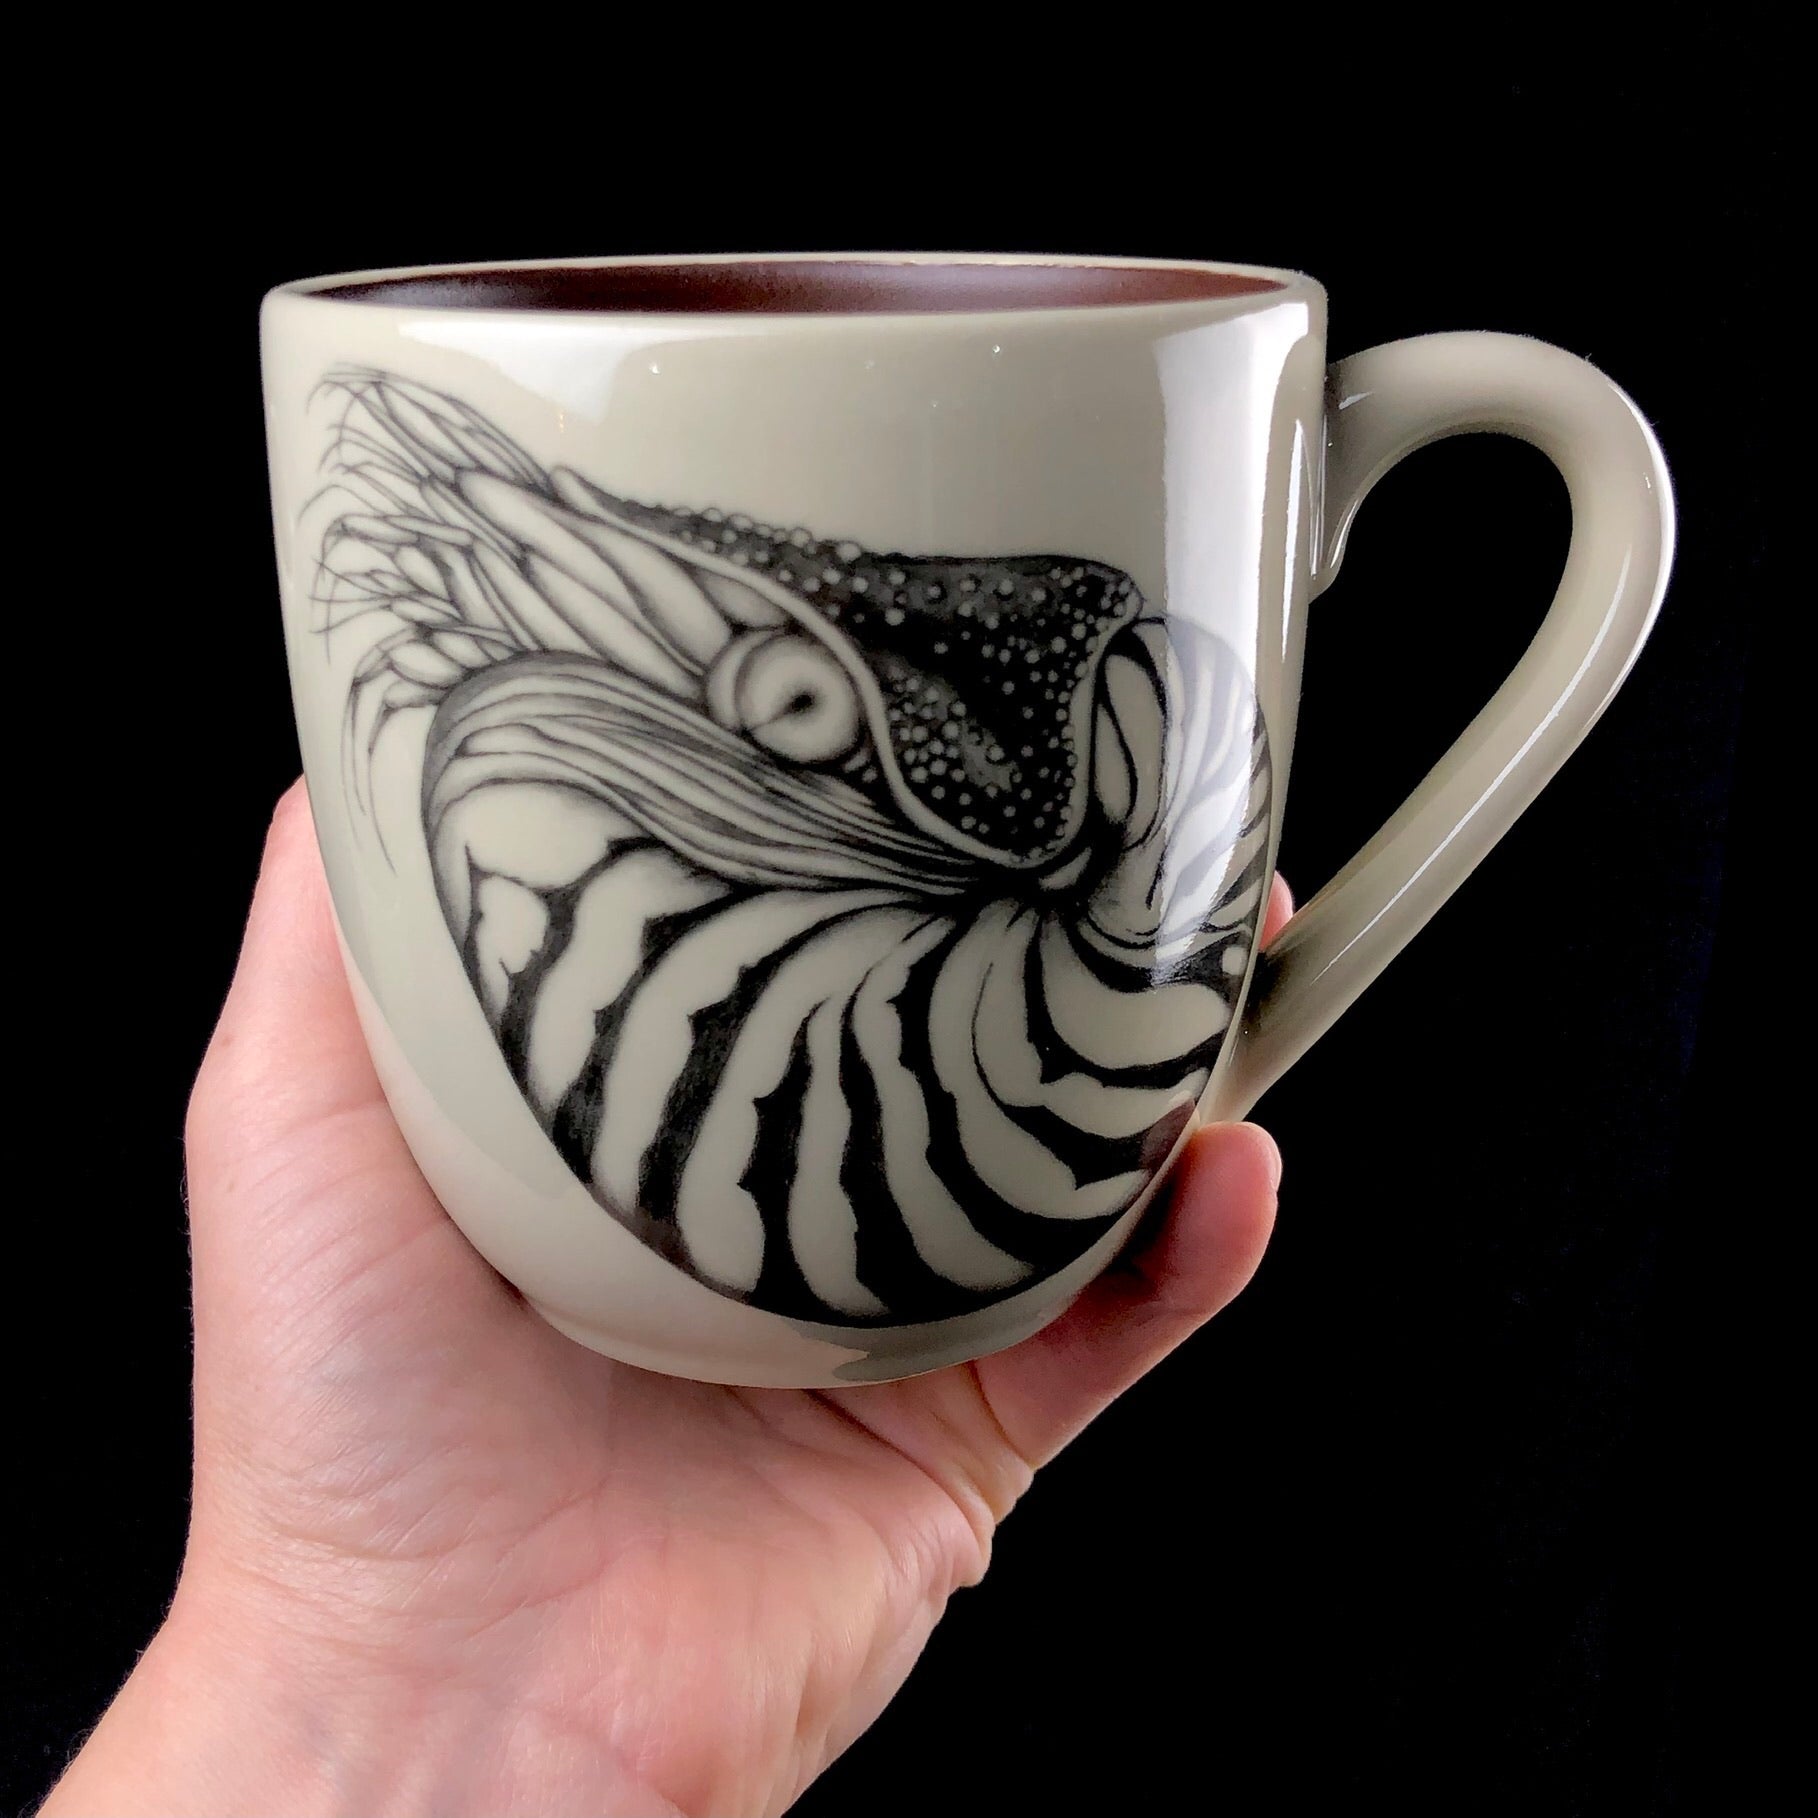 Nautilus Mug shown in hand for size reference